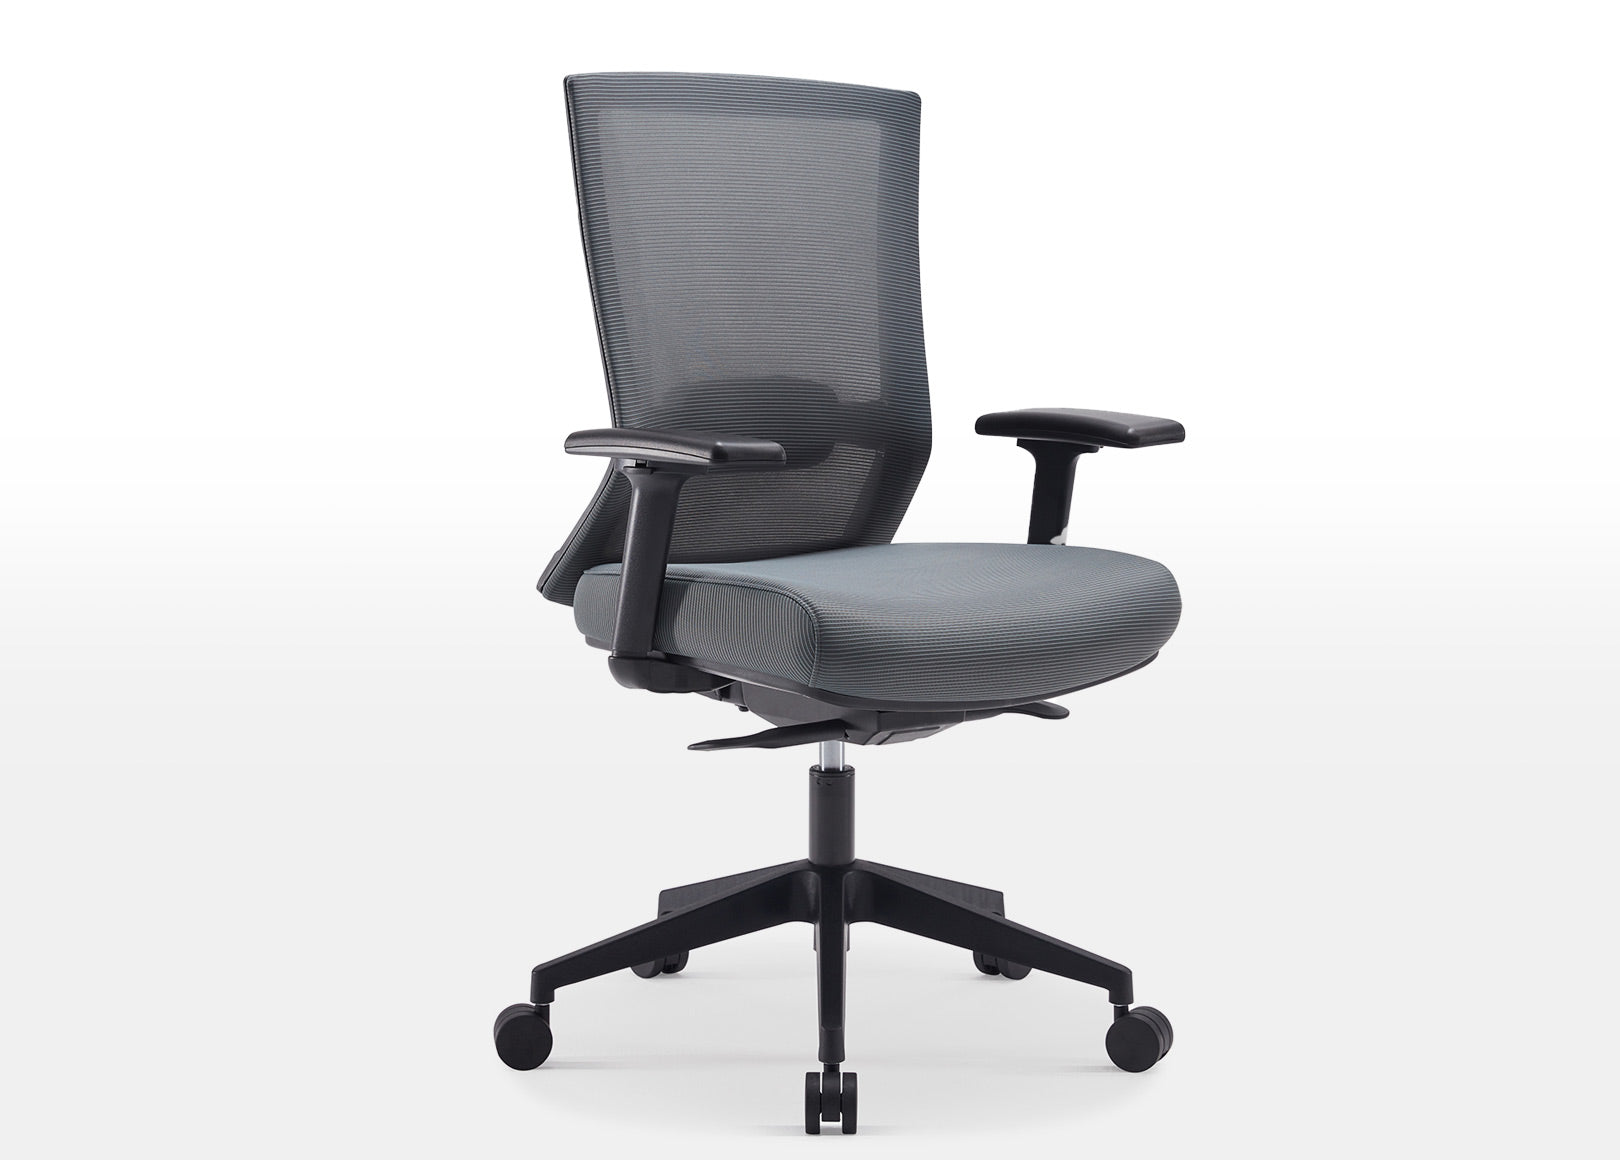 Grey Elite67 ergonomic chair with customizable features for personalized comfort, including lumbar support, seat depth, and armrests, perfect for home or office use.